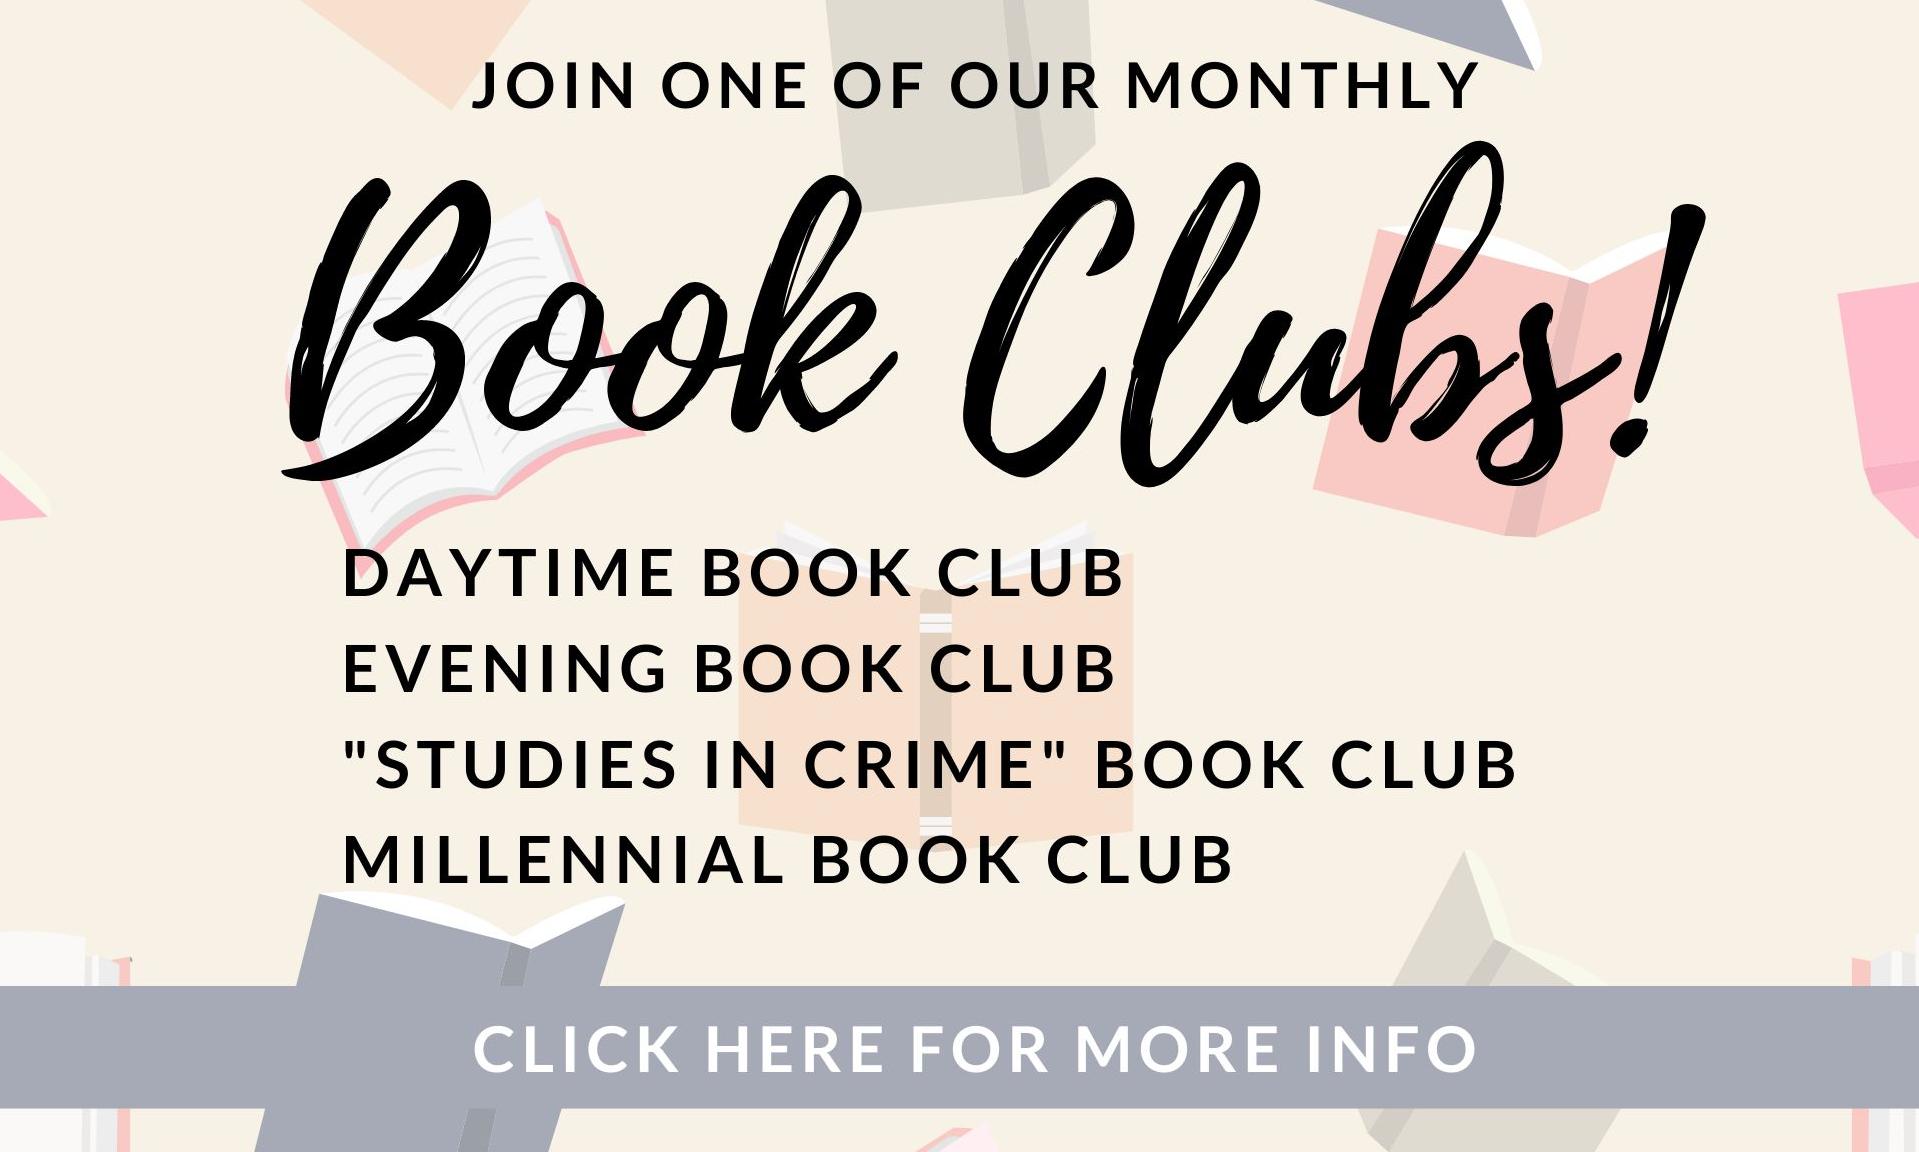 Join one of our monthly Book Clubs! Daytime Book Group, Evening Book Group, Studies in Crime Book Club, Millennial Book Club, Click Here for more info.